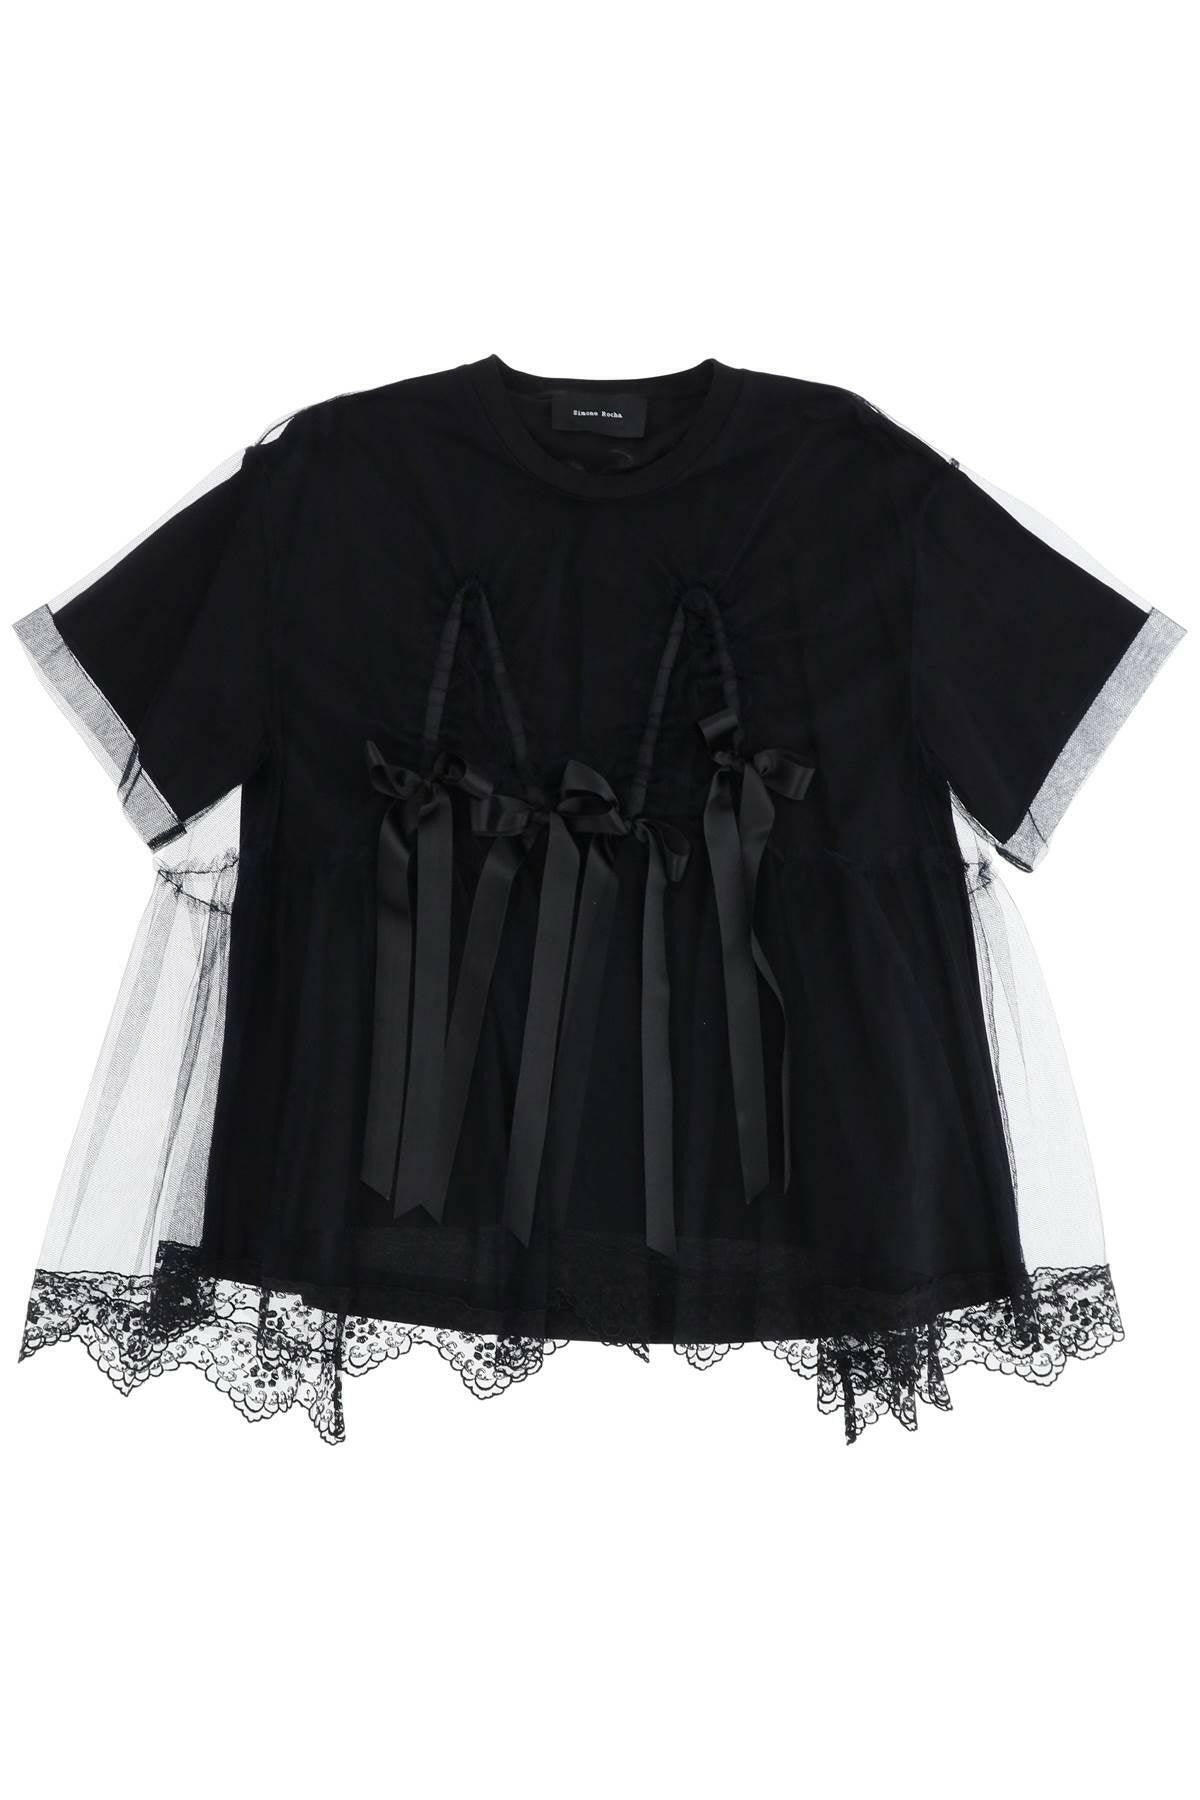 Simone Rocha Tulle Top With Lace And Bows - JOHN JULIA